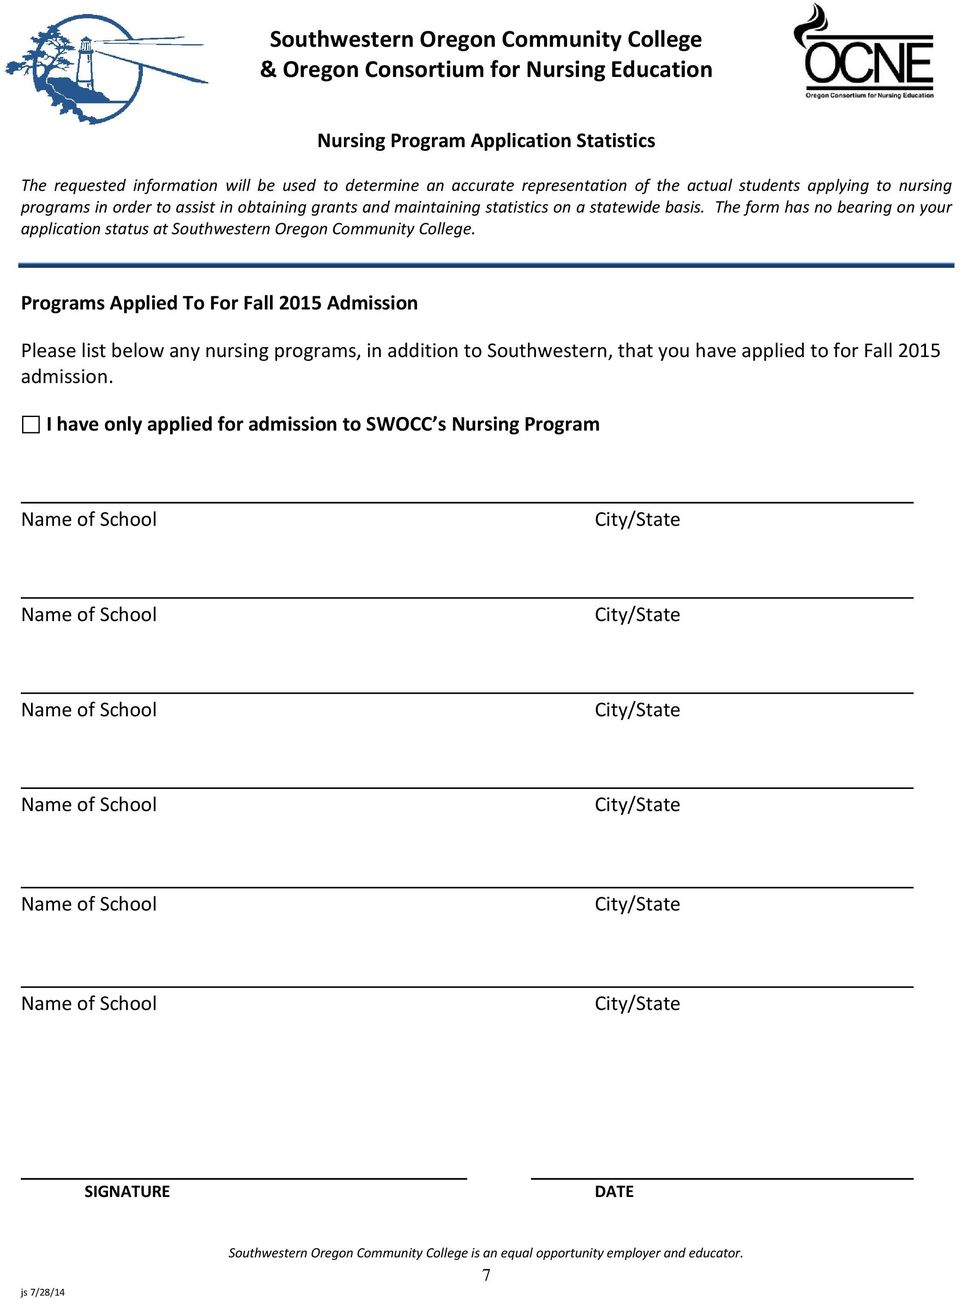 The form has no bearing on your application status at Southwestern Oregon Community College.